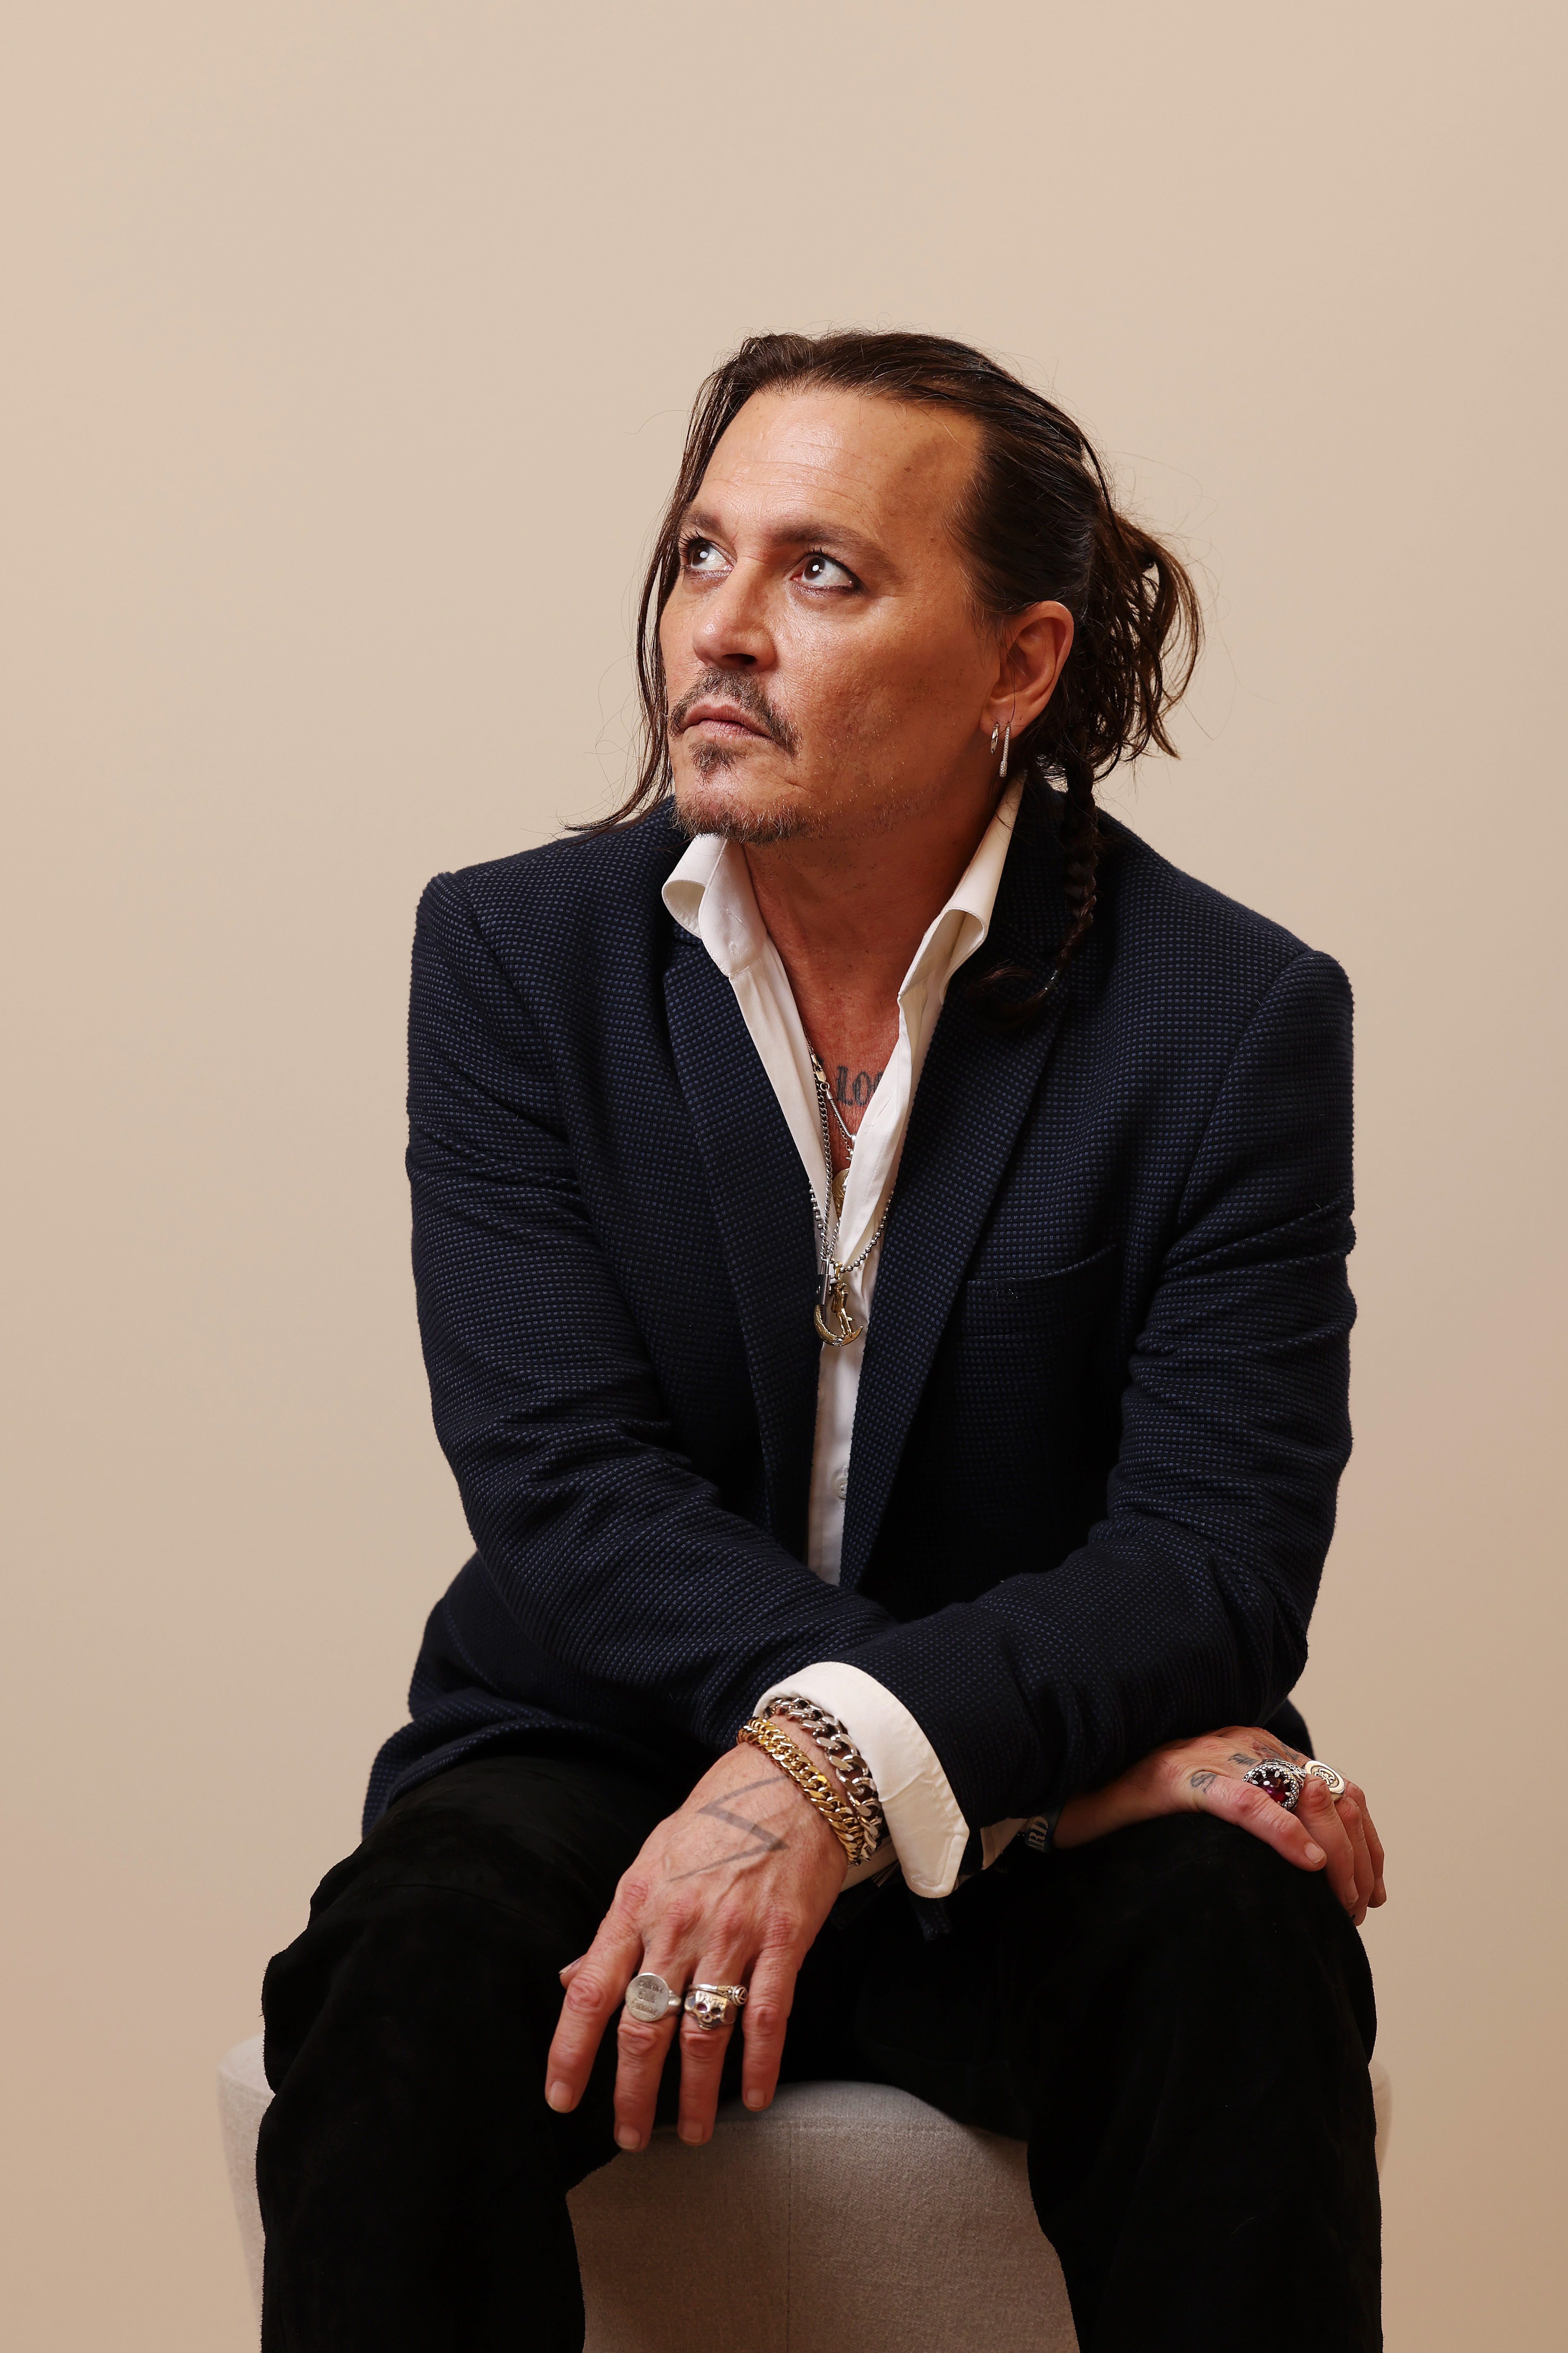 Johnny Depp posing for a portrait during the Red Sea International Film Festival in Jeddah, Saudi Arabia on December 2, 2023 | Source: Getty Images